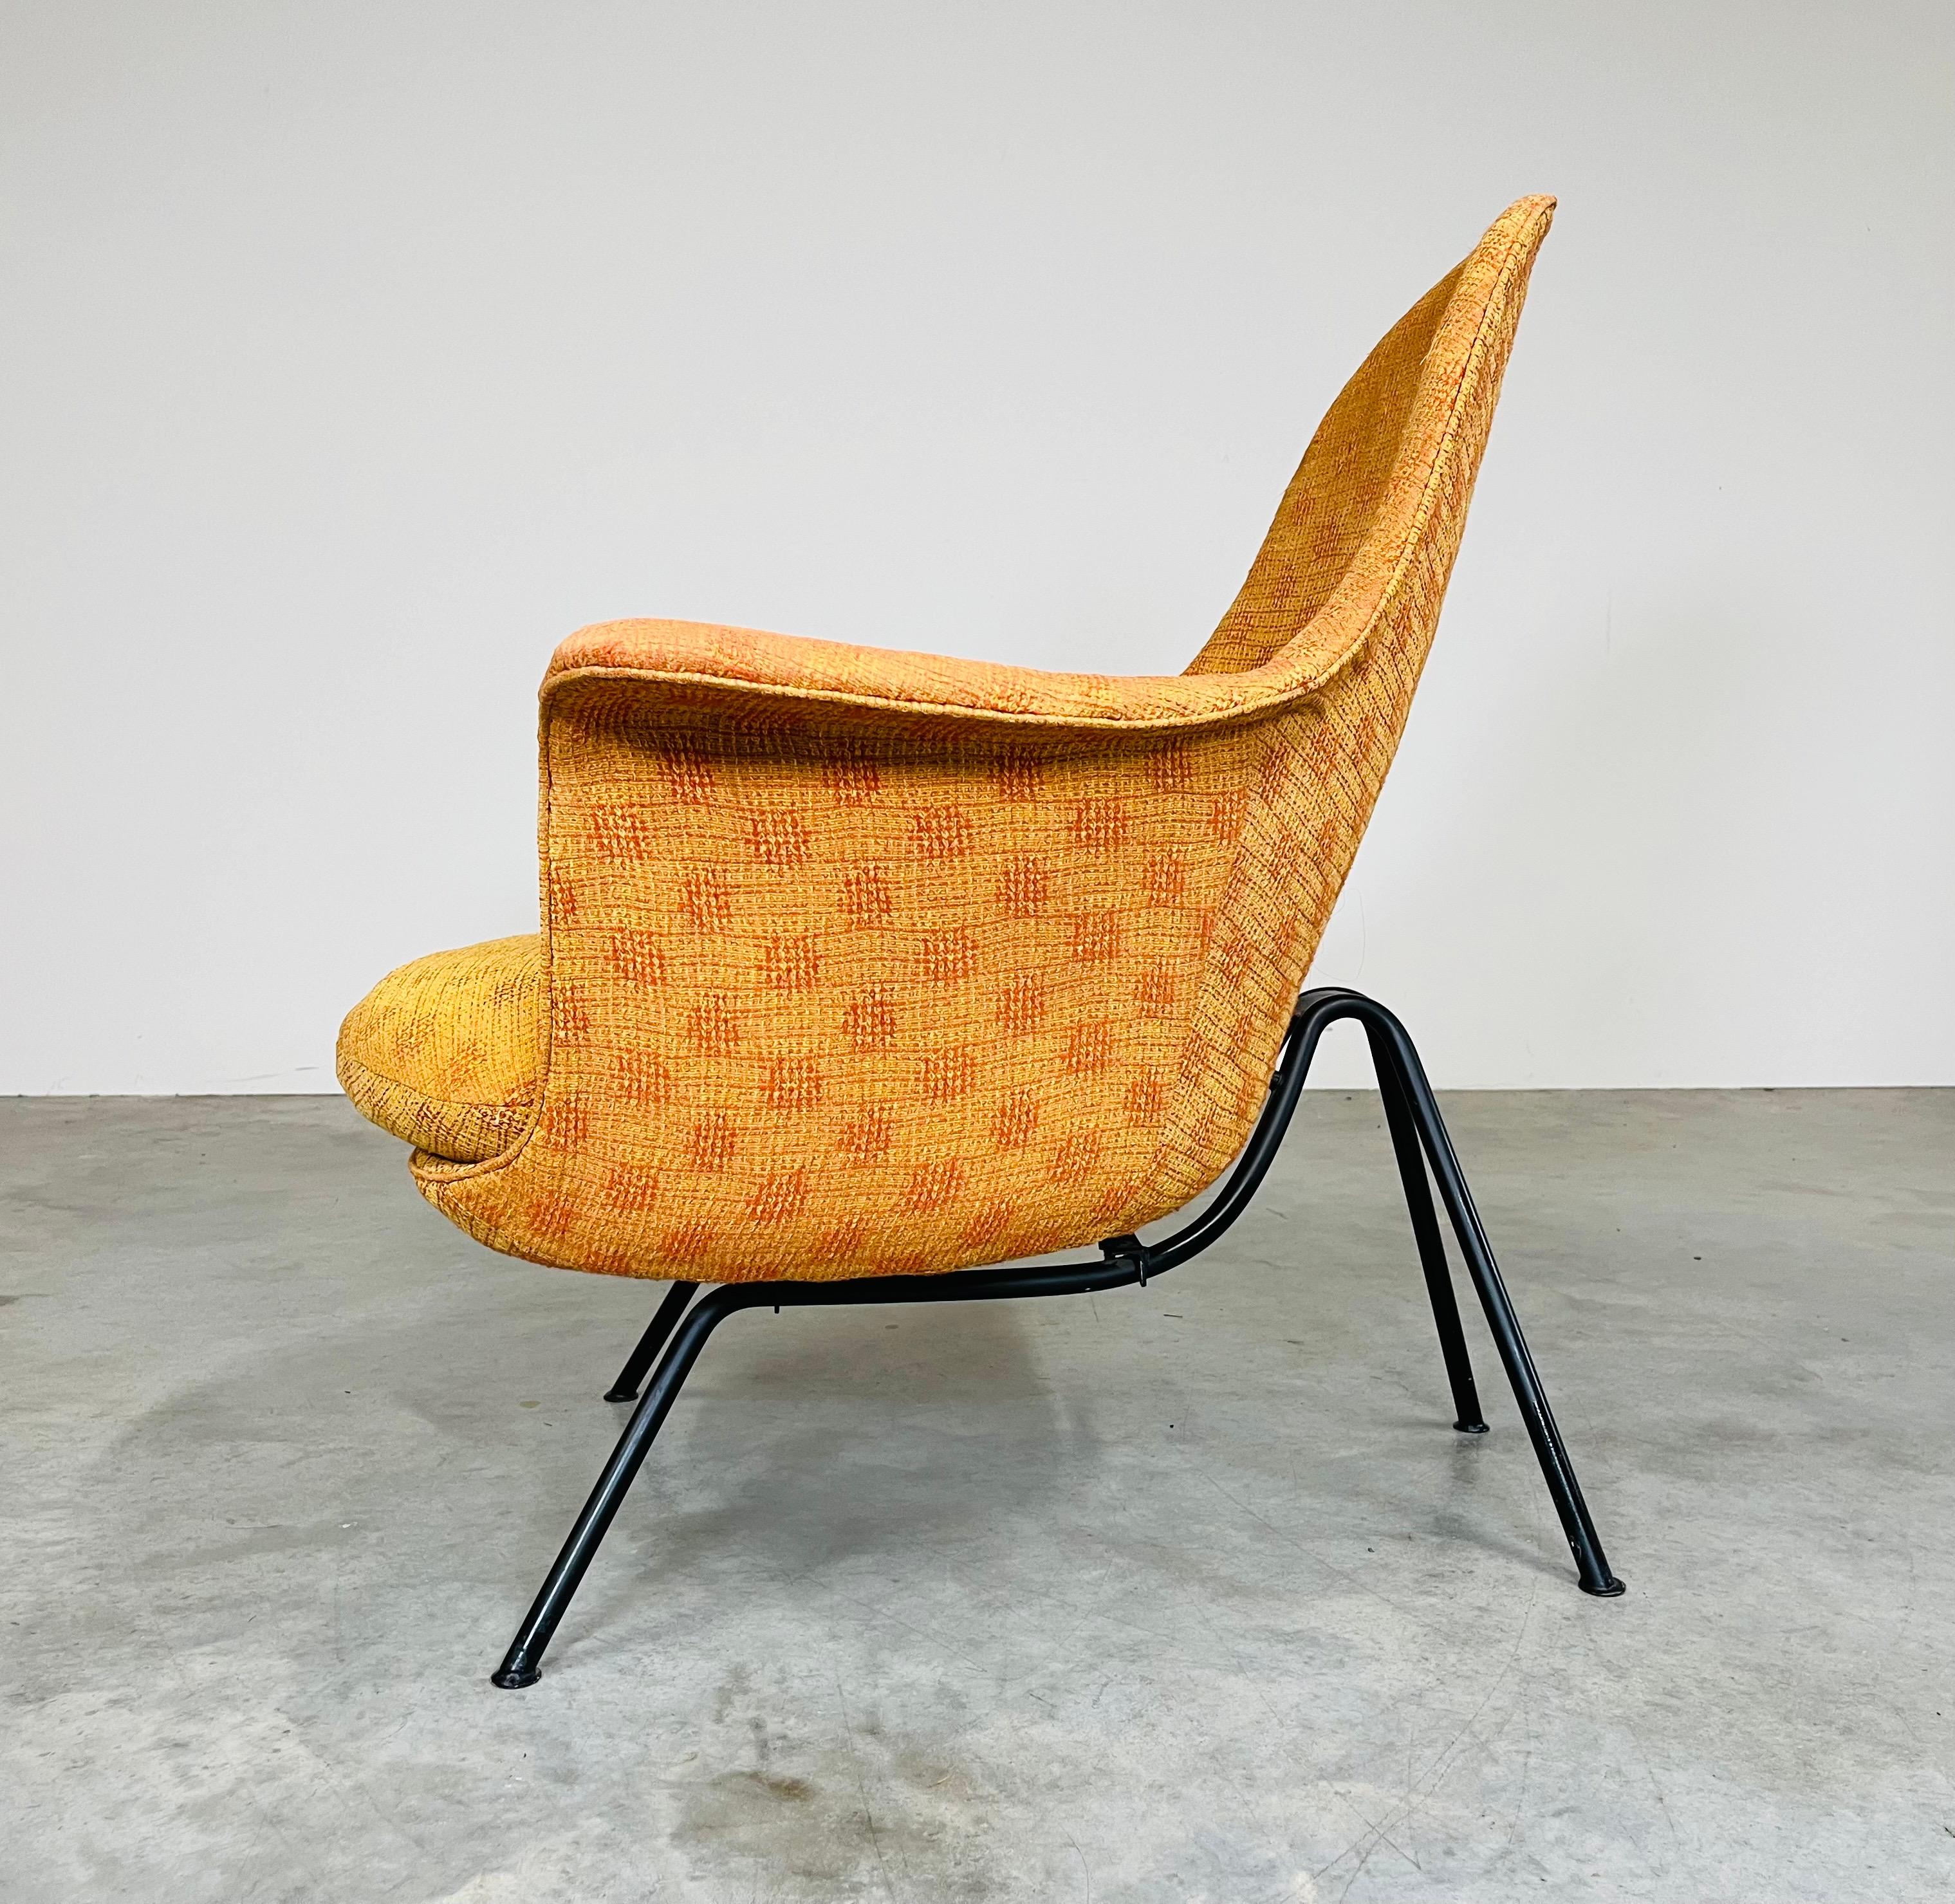 Enameled Easy Lounge Chair By Hans Bellmann From His Sitwell Collection Switzerland -1955 For Sale